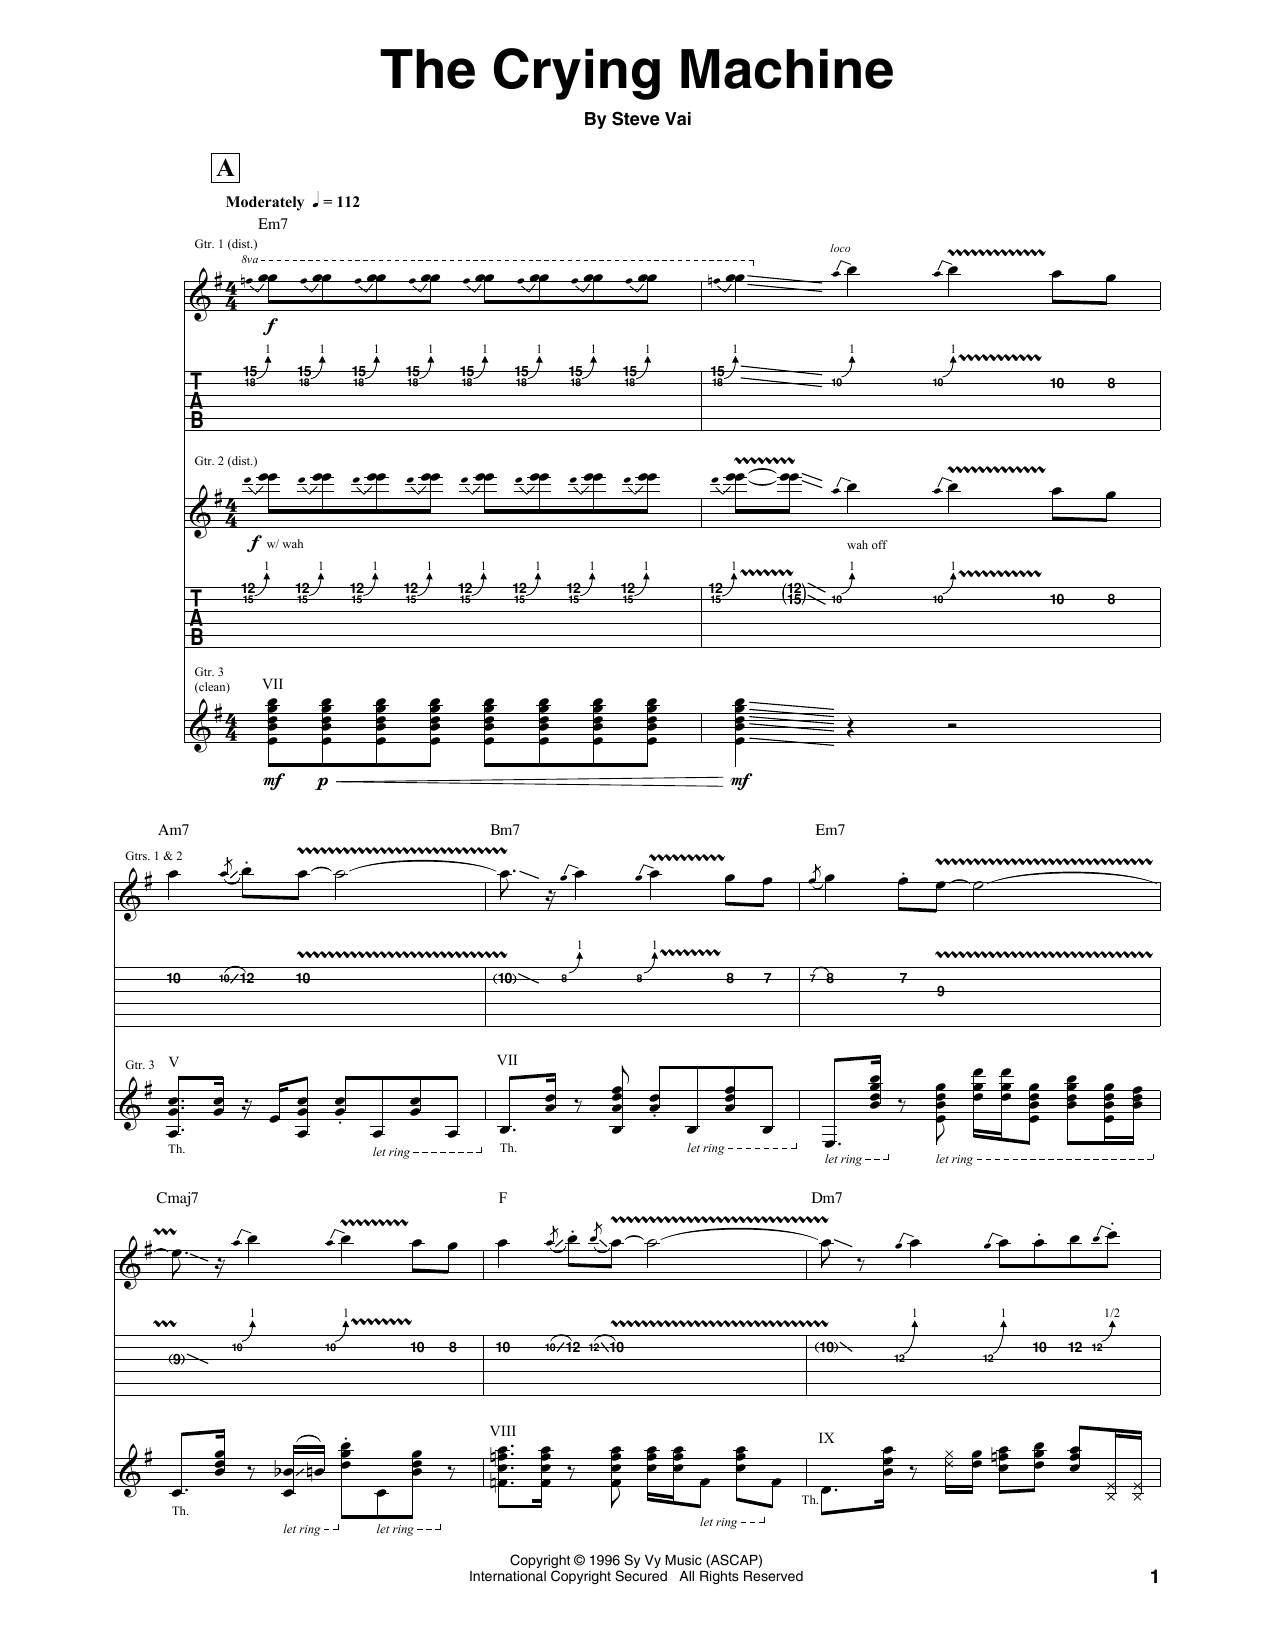 Download Steve Vai The Crying Machine Sheet Music